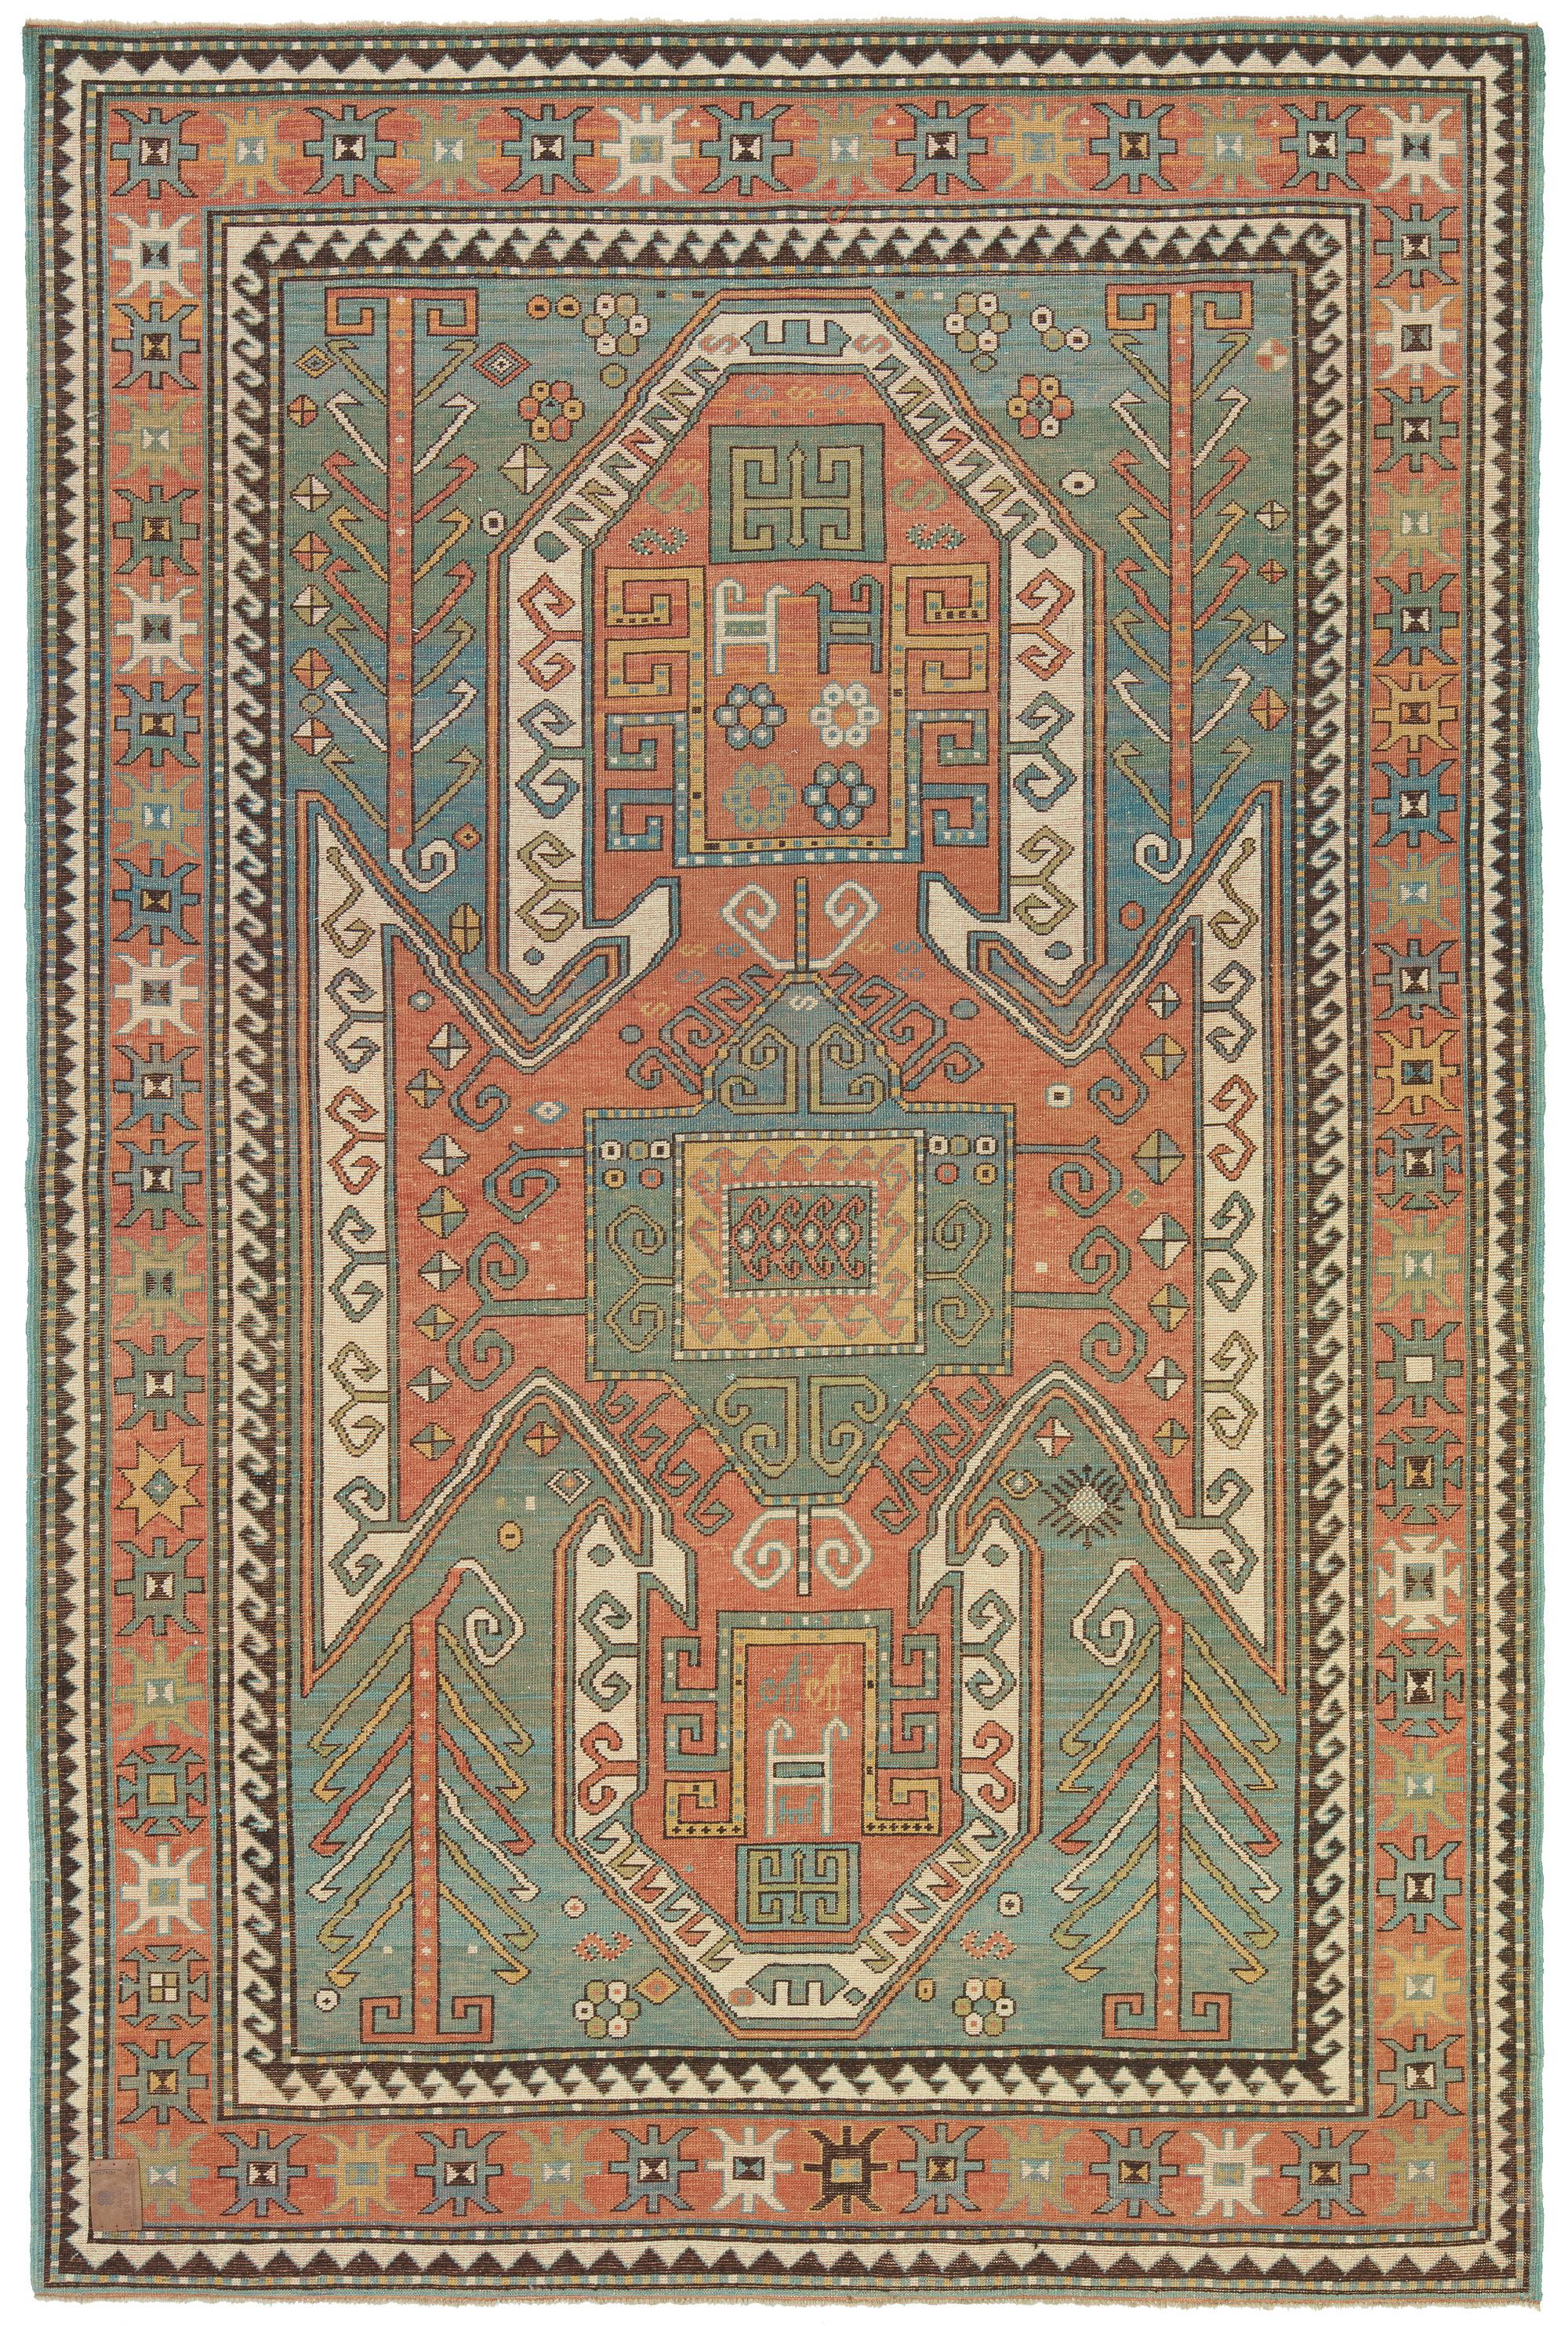 The source of the rug comes from the book Tapis du Caucase – Rugs of the Caucasus, Ian Bennett & Aziz Bassoul, The Nicholas Sursock Museum, Beirut, Lebanon 2003, nr.7 and Oriental Rugs Volume 1 Caucasian, Ian Bennett, Oriental Textile Press,